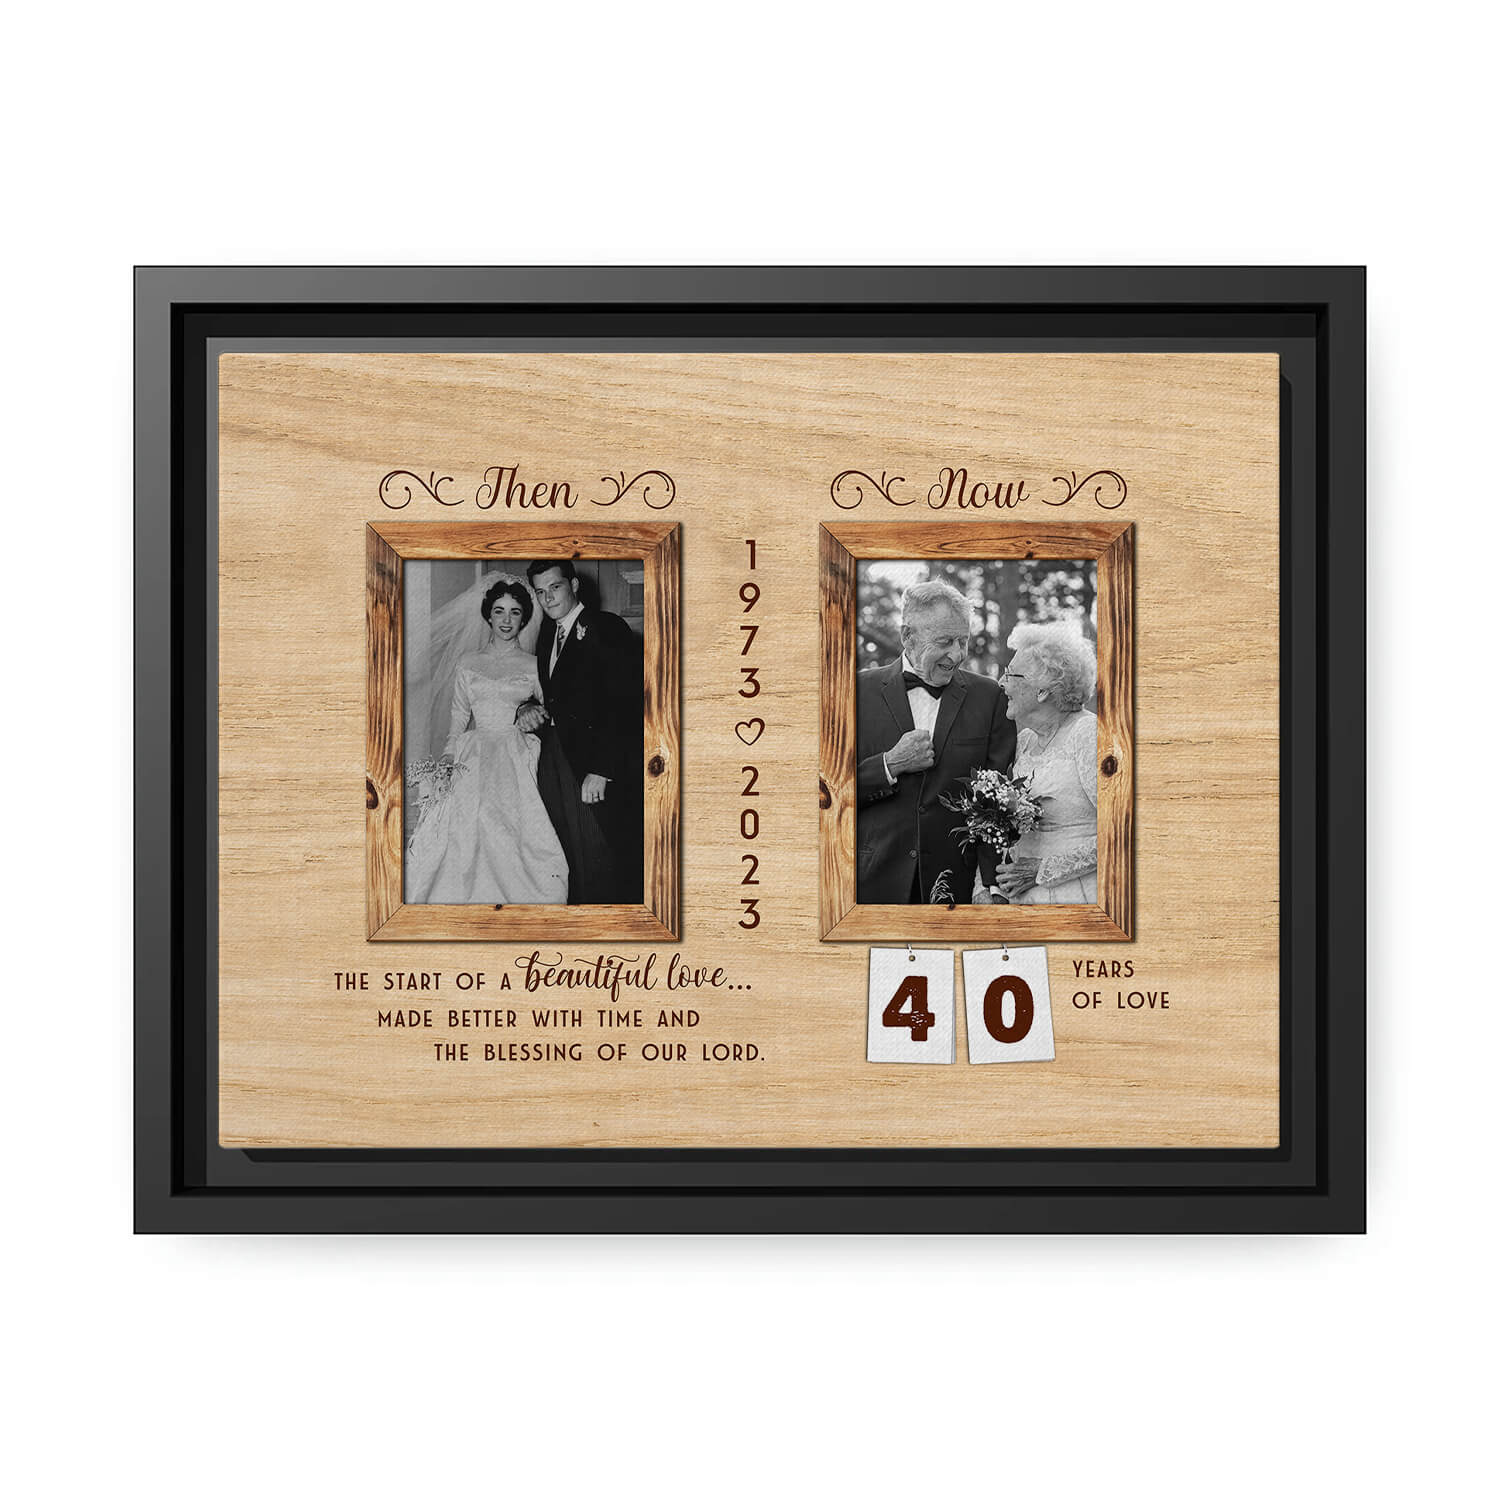 Then and Now 40 Years of Love - Personalized 40 Year Anniversary gift for Husband or Wife - Custom Canvas - MyMindfulGifts